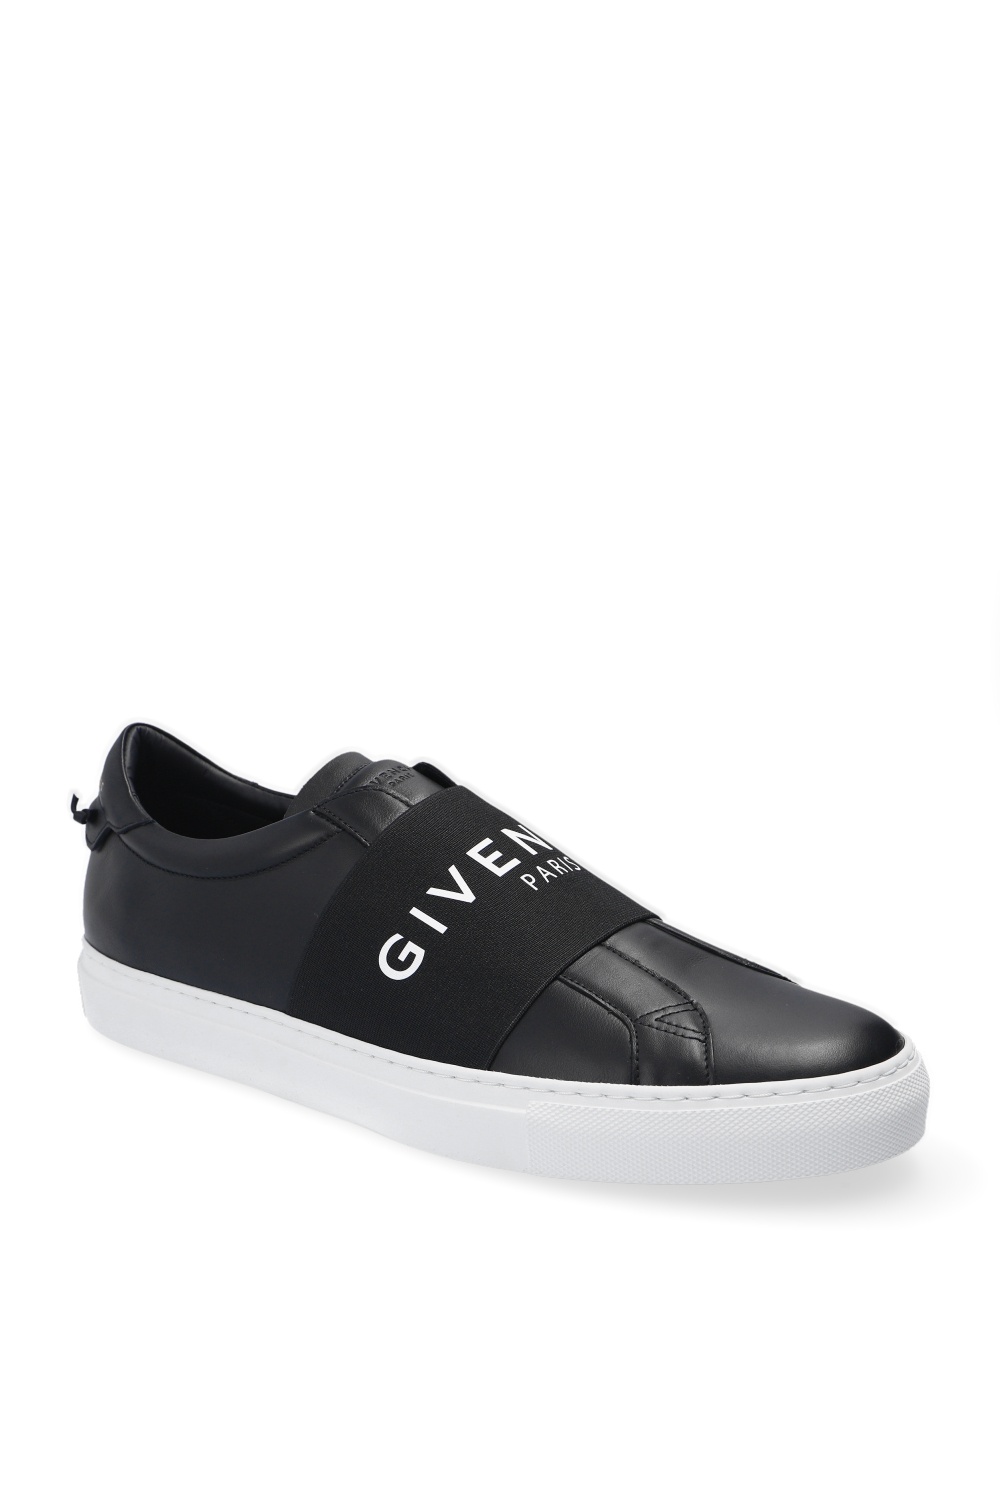 givenchy black urban street sneakers